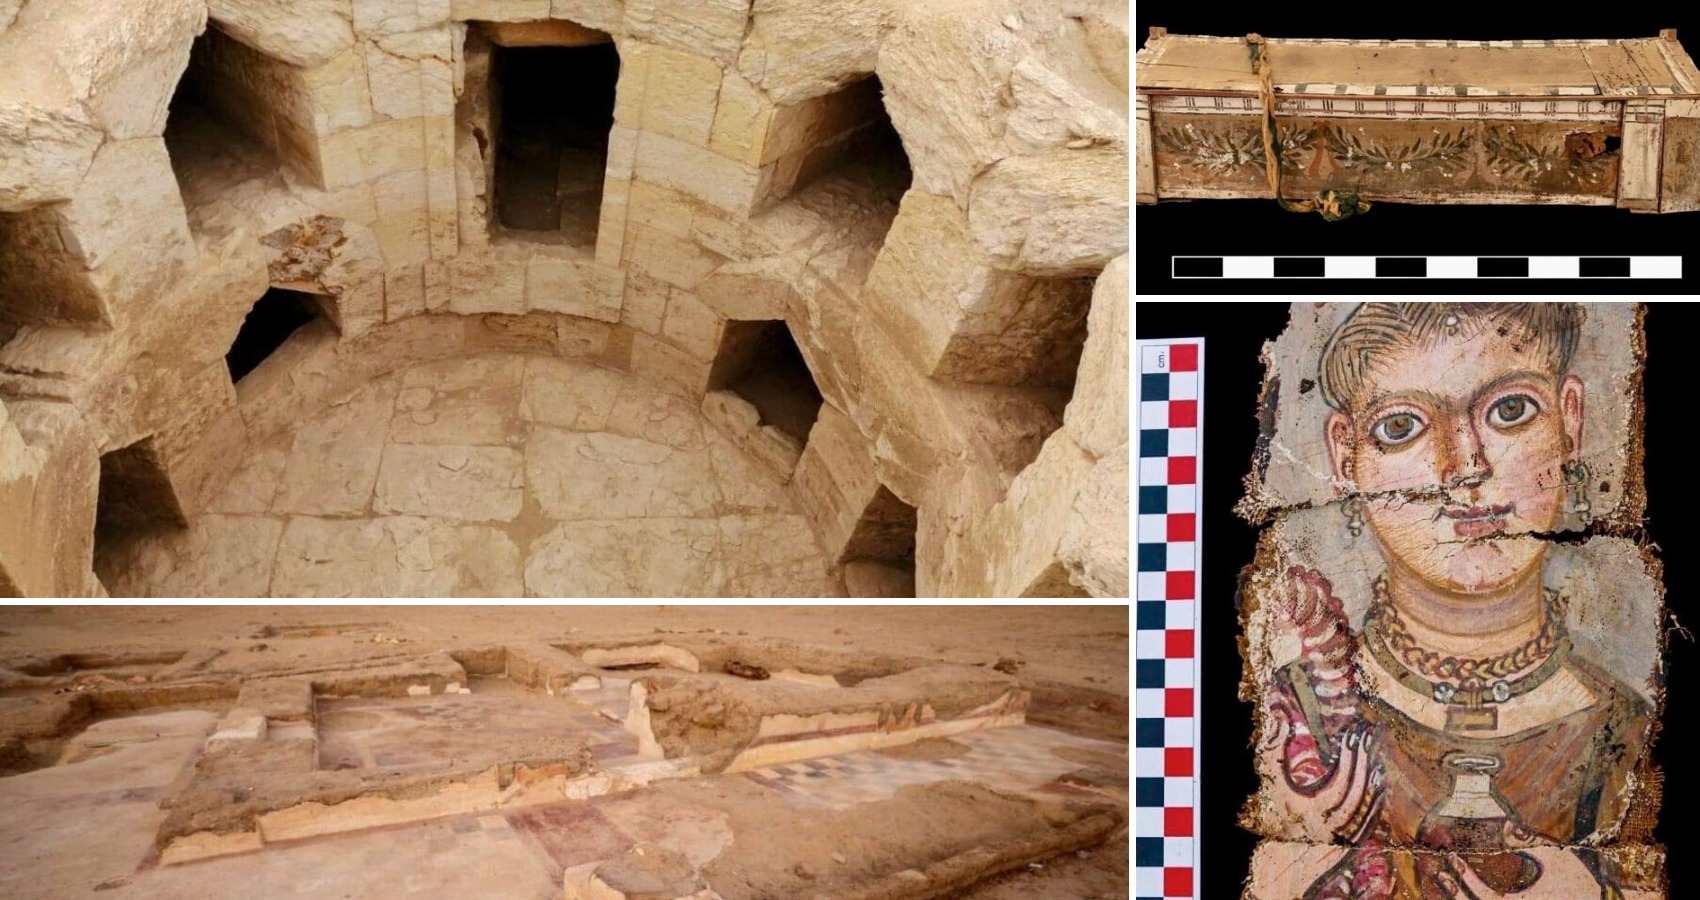 Huge funerary building and Fayoum portraits discovered in Egypt Fayoum